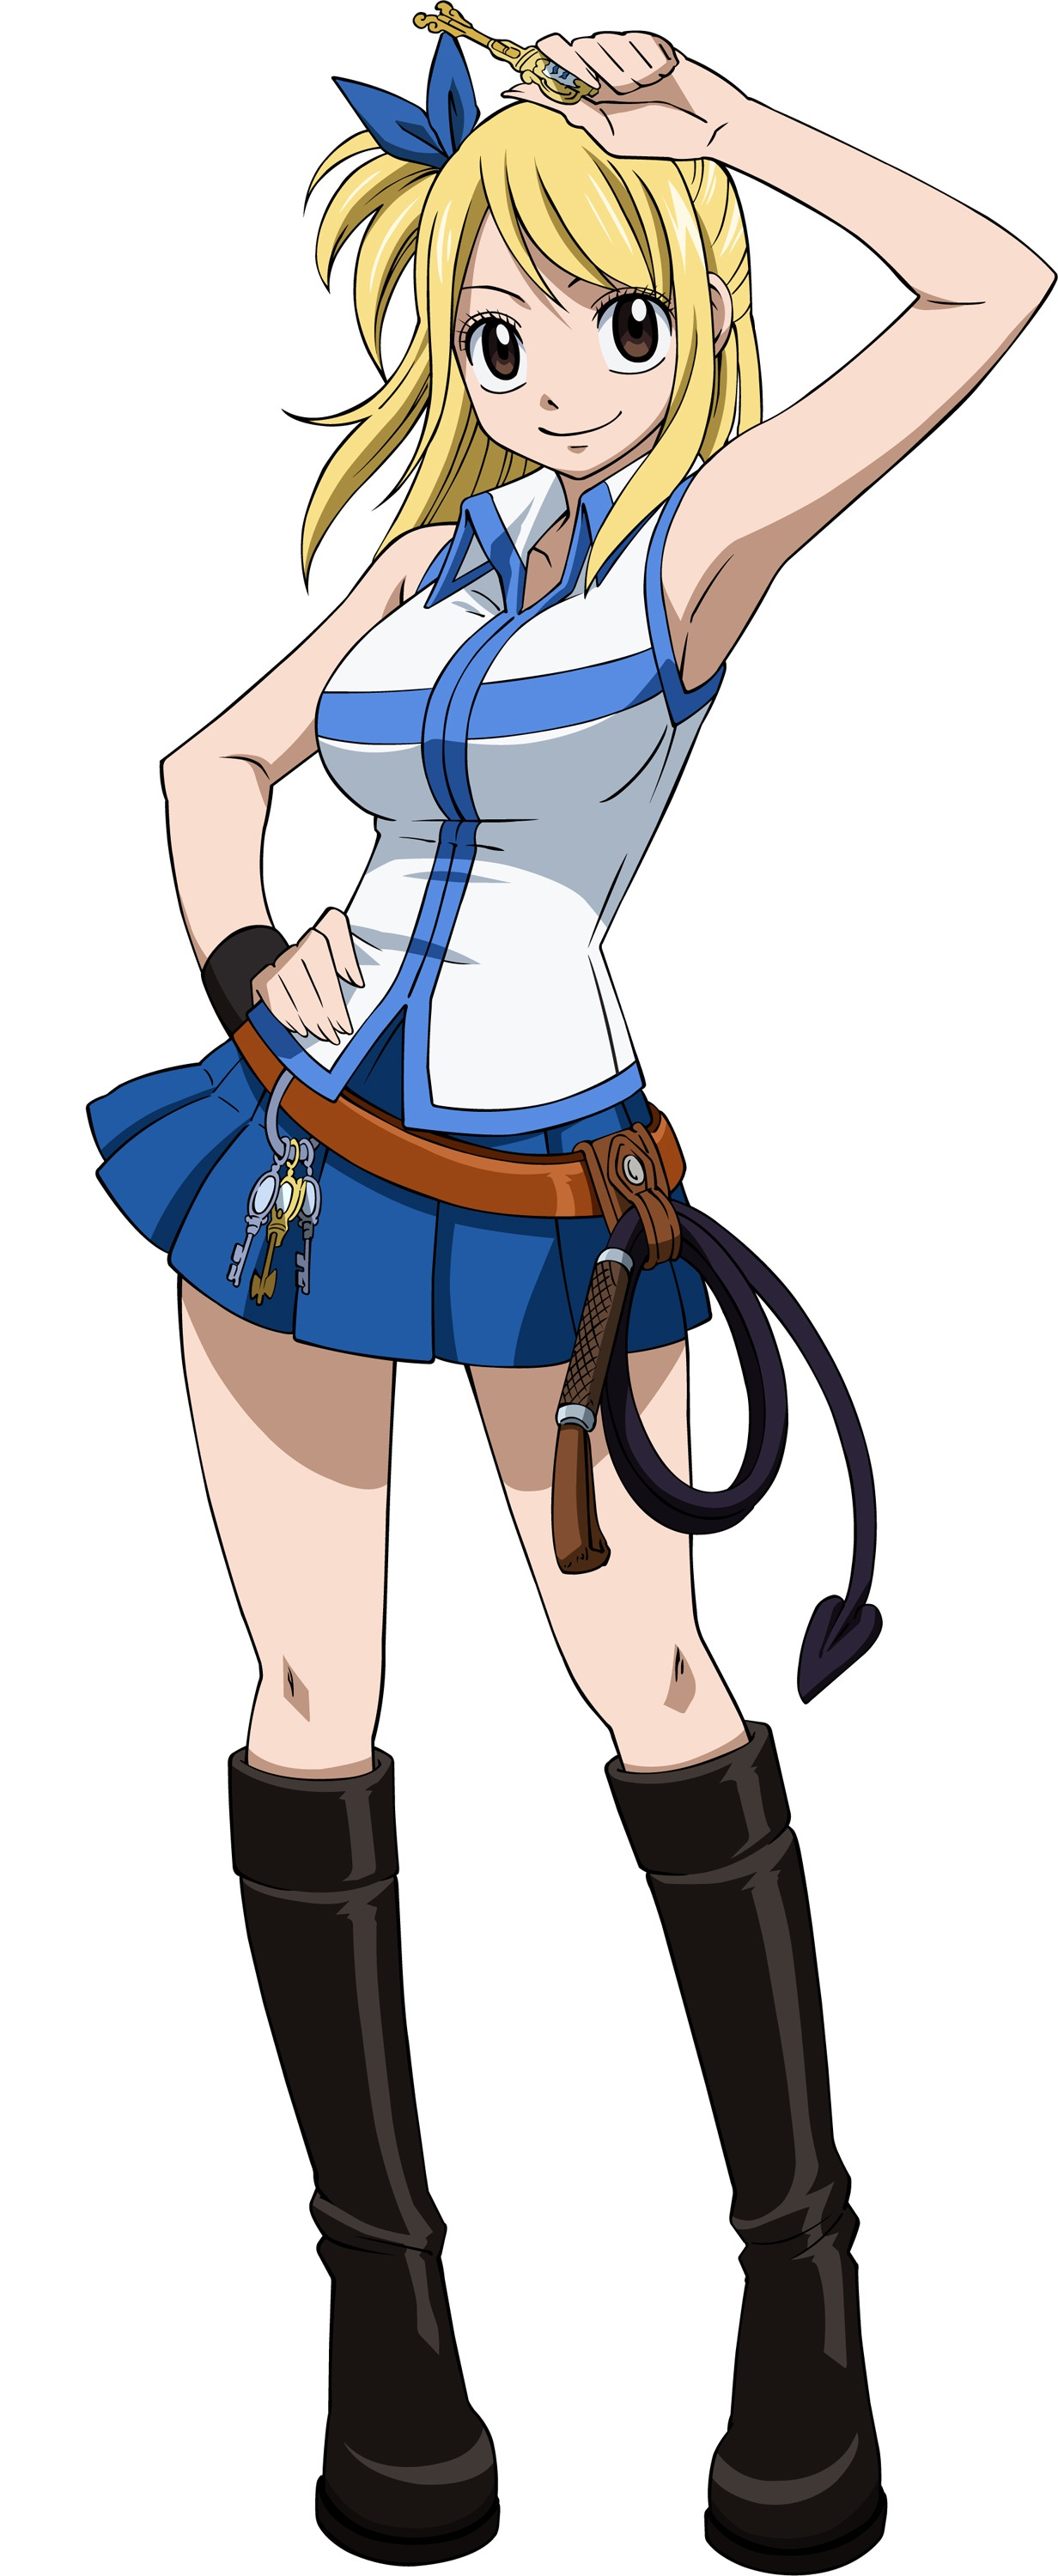 http://static2.wikia.nocookie.net/__cb20111029200945/fairytail/es/images/0/05/Lucy.png